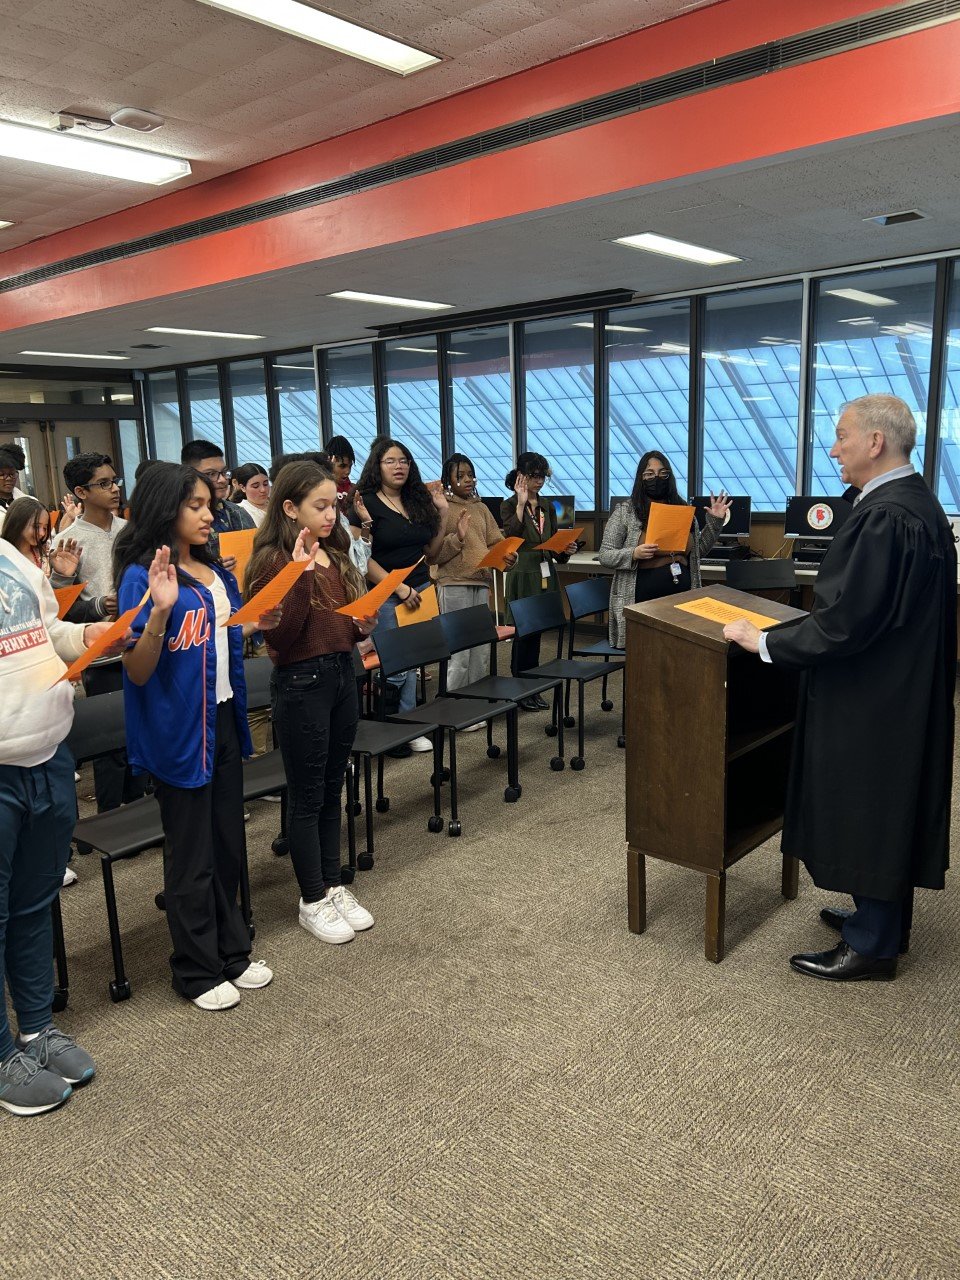 Members of the J. W. Dodd Middle School peer mediation team completed training and took an oath to use their peer mediation skills to help others resolve conflicts.